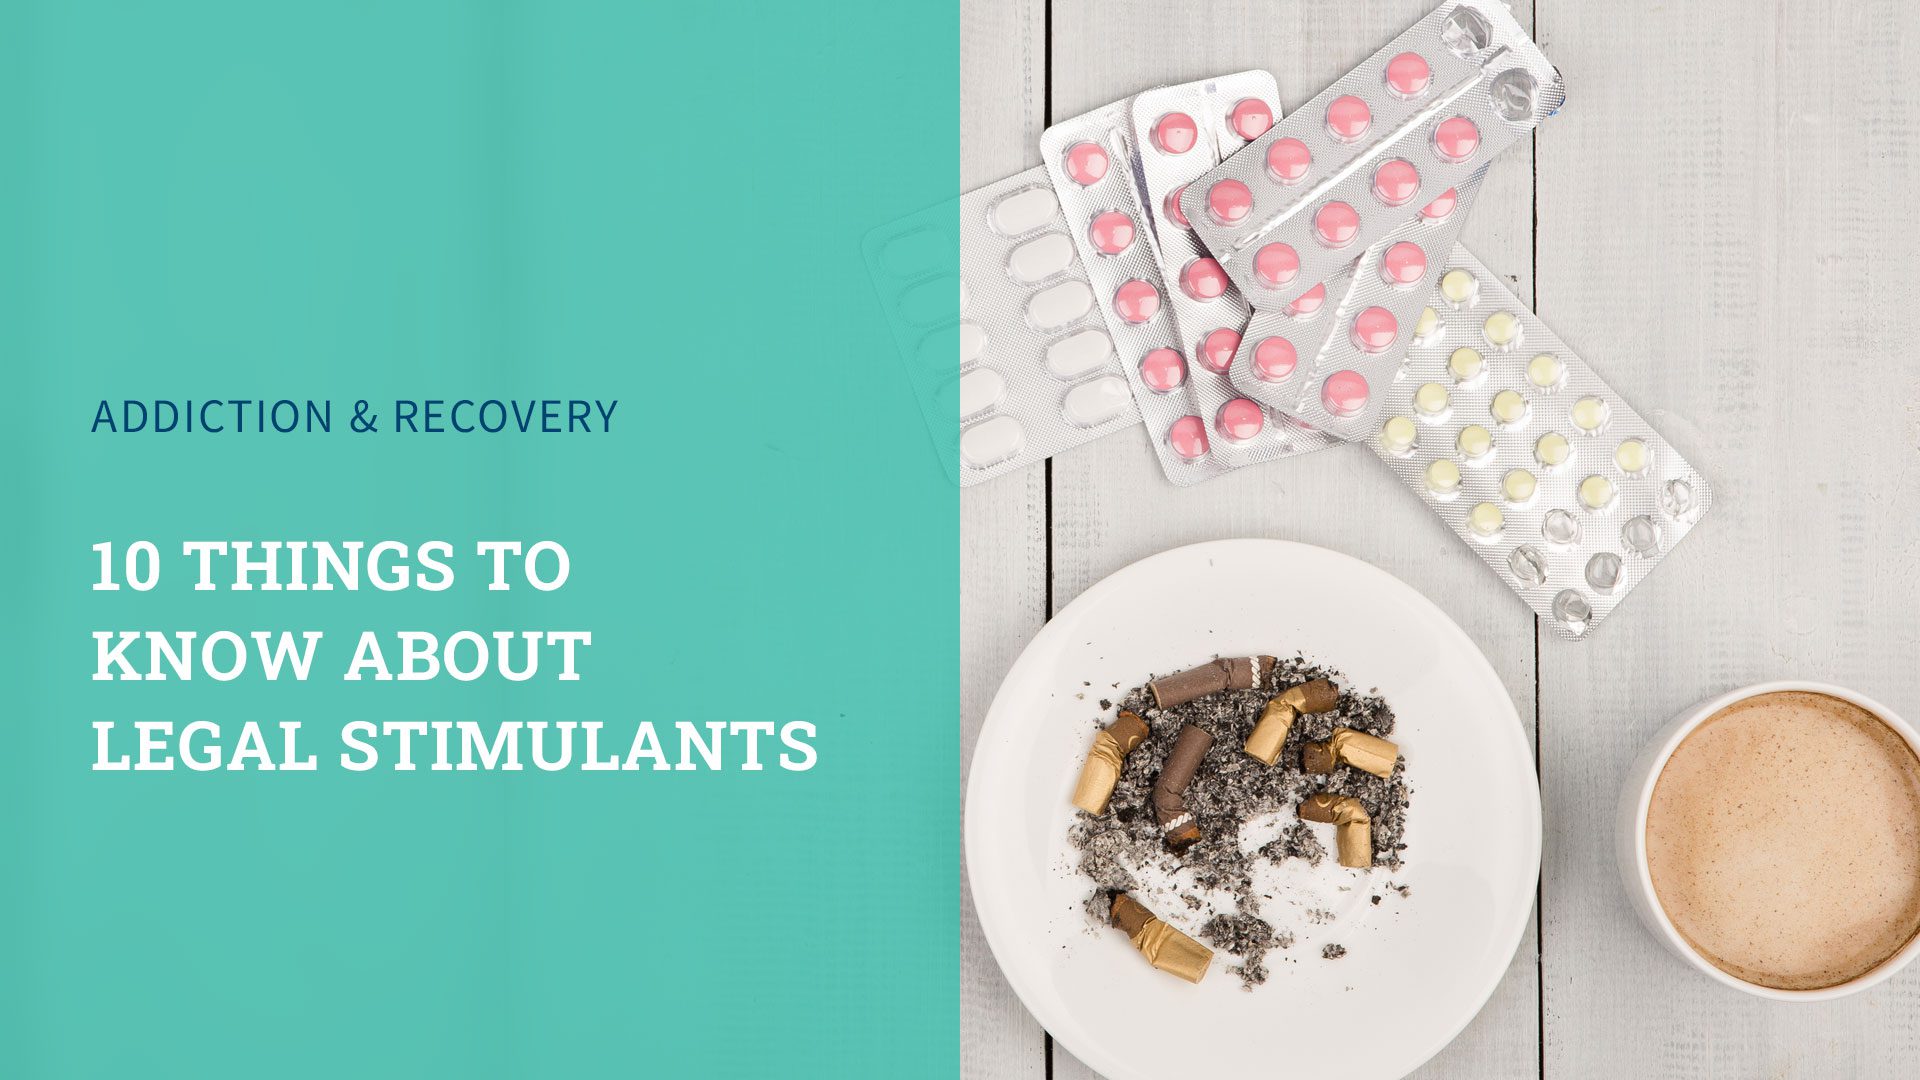 10 Things to Know About Legal Stimulants